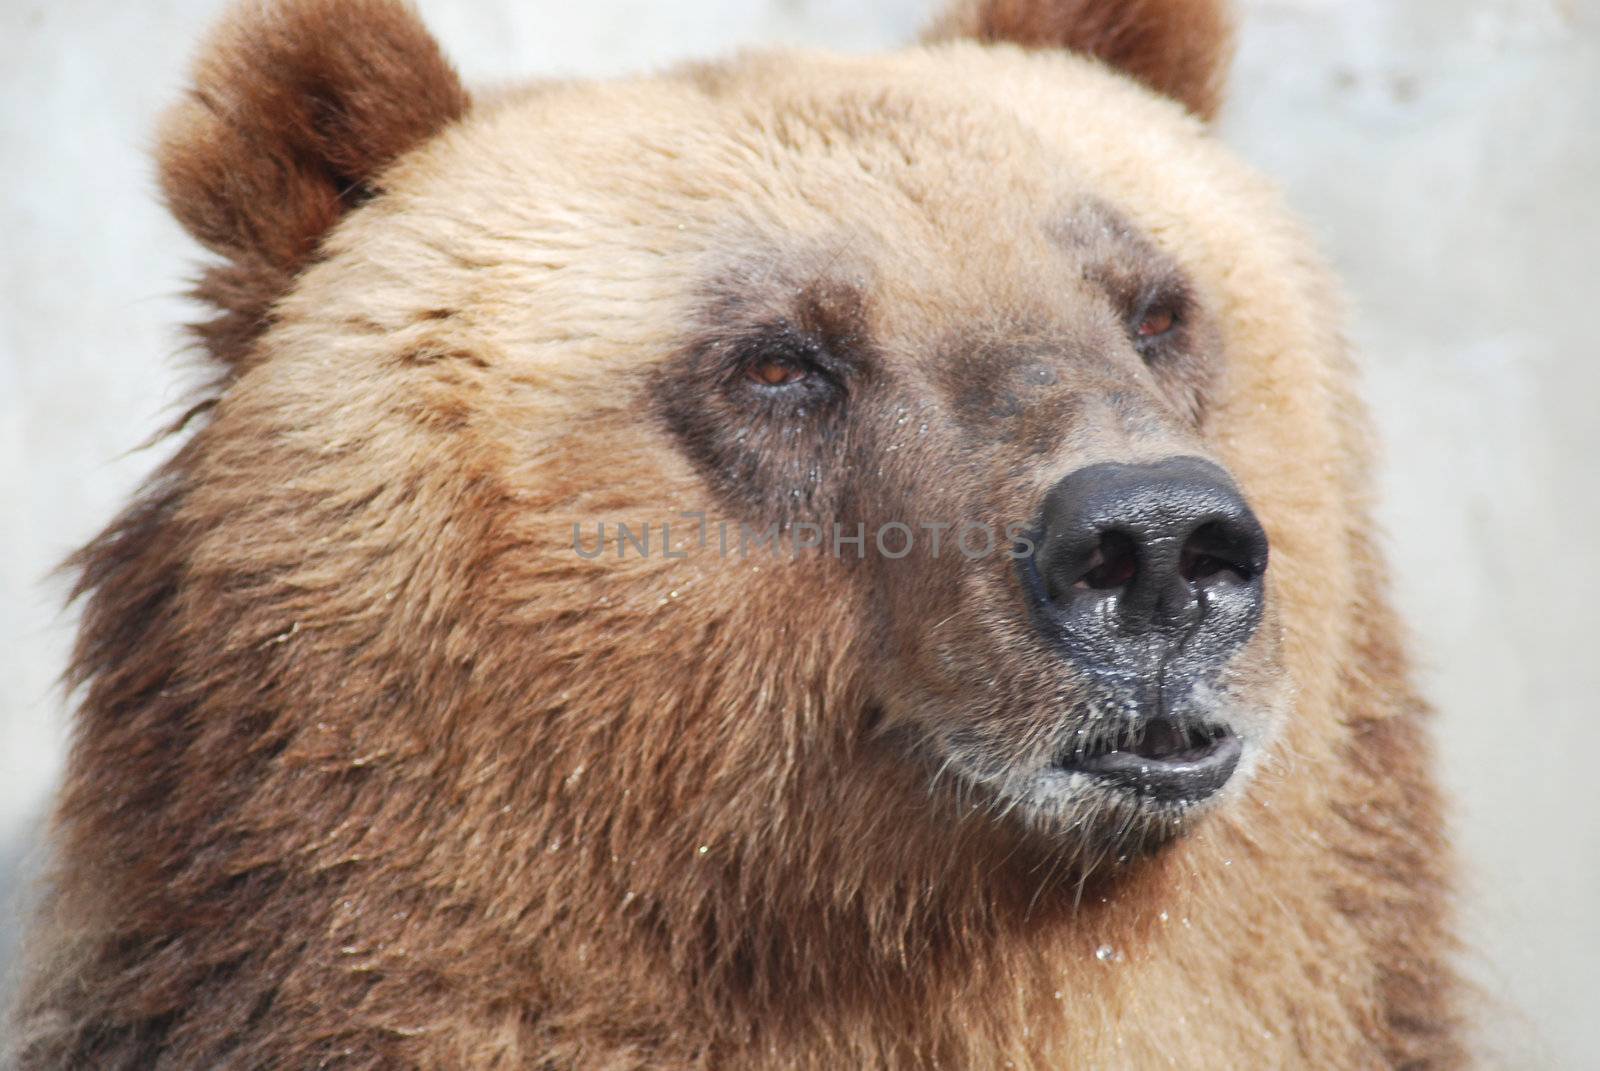 The brown bear close up, wild life  by svtrotof